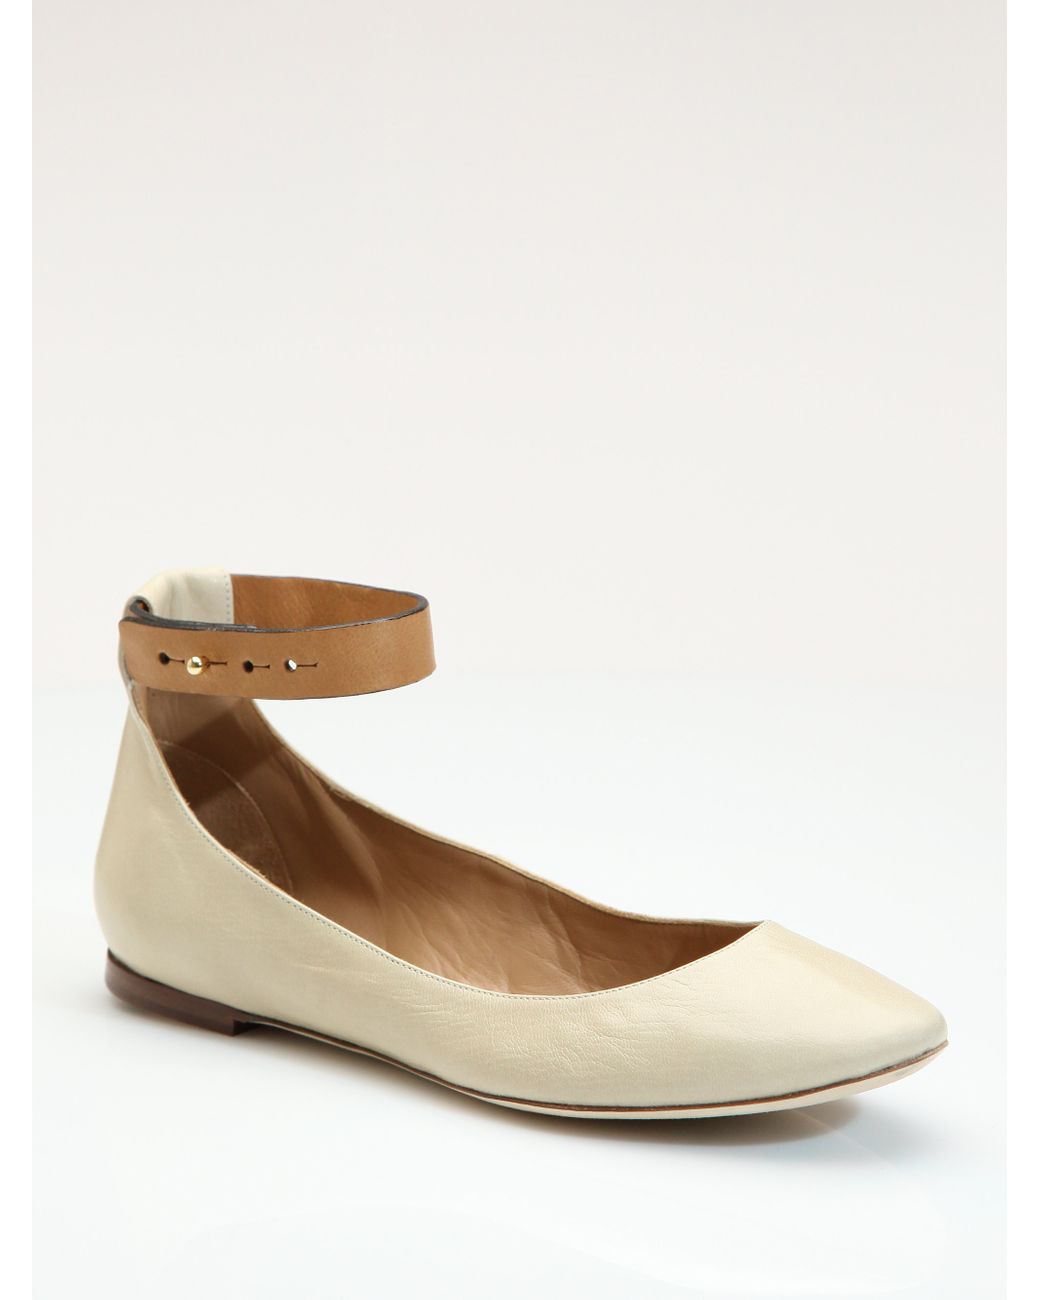 Chloé Ankle Strap Ballet Flats in Natural | Lyst